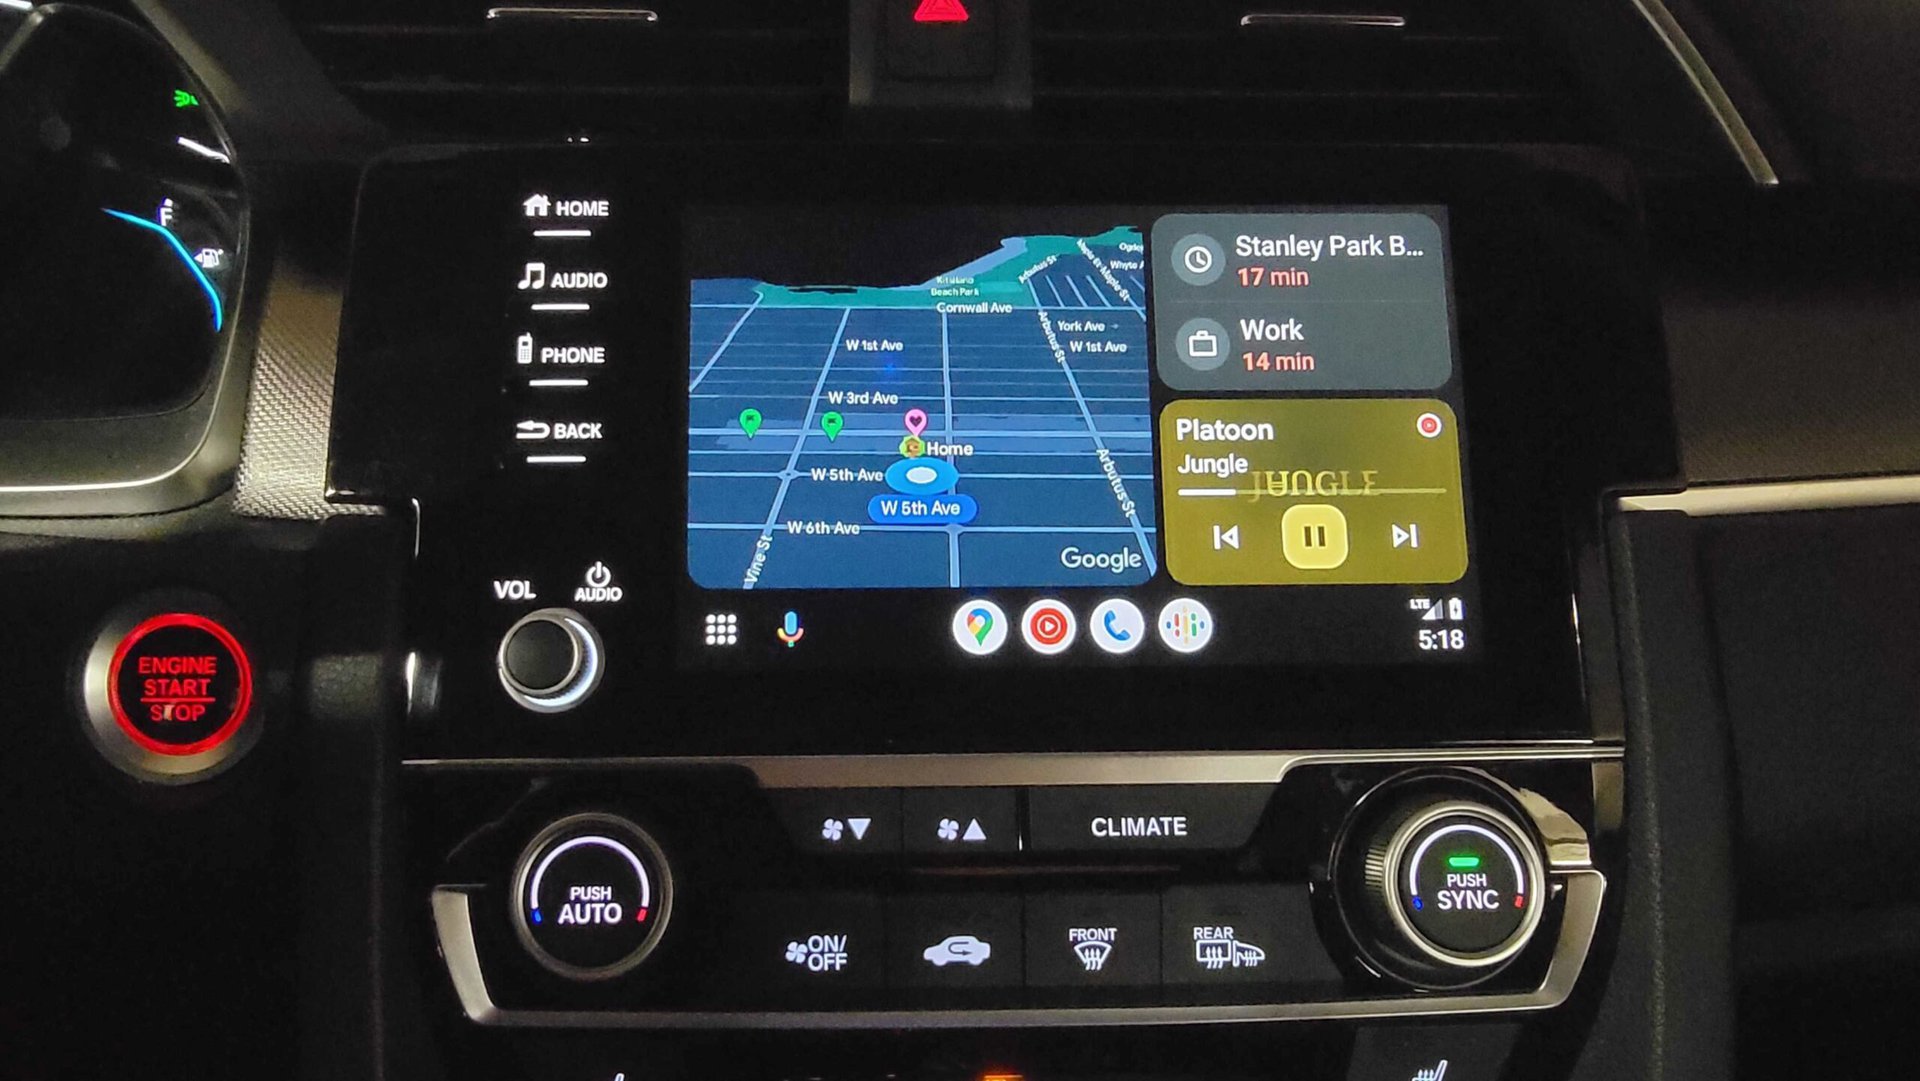 https://www.androidauthority.com/wp-content/uploads/2022/12/dashboard-android-auto-scaled.jpg